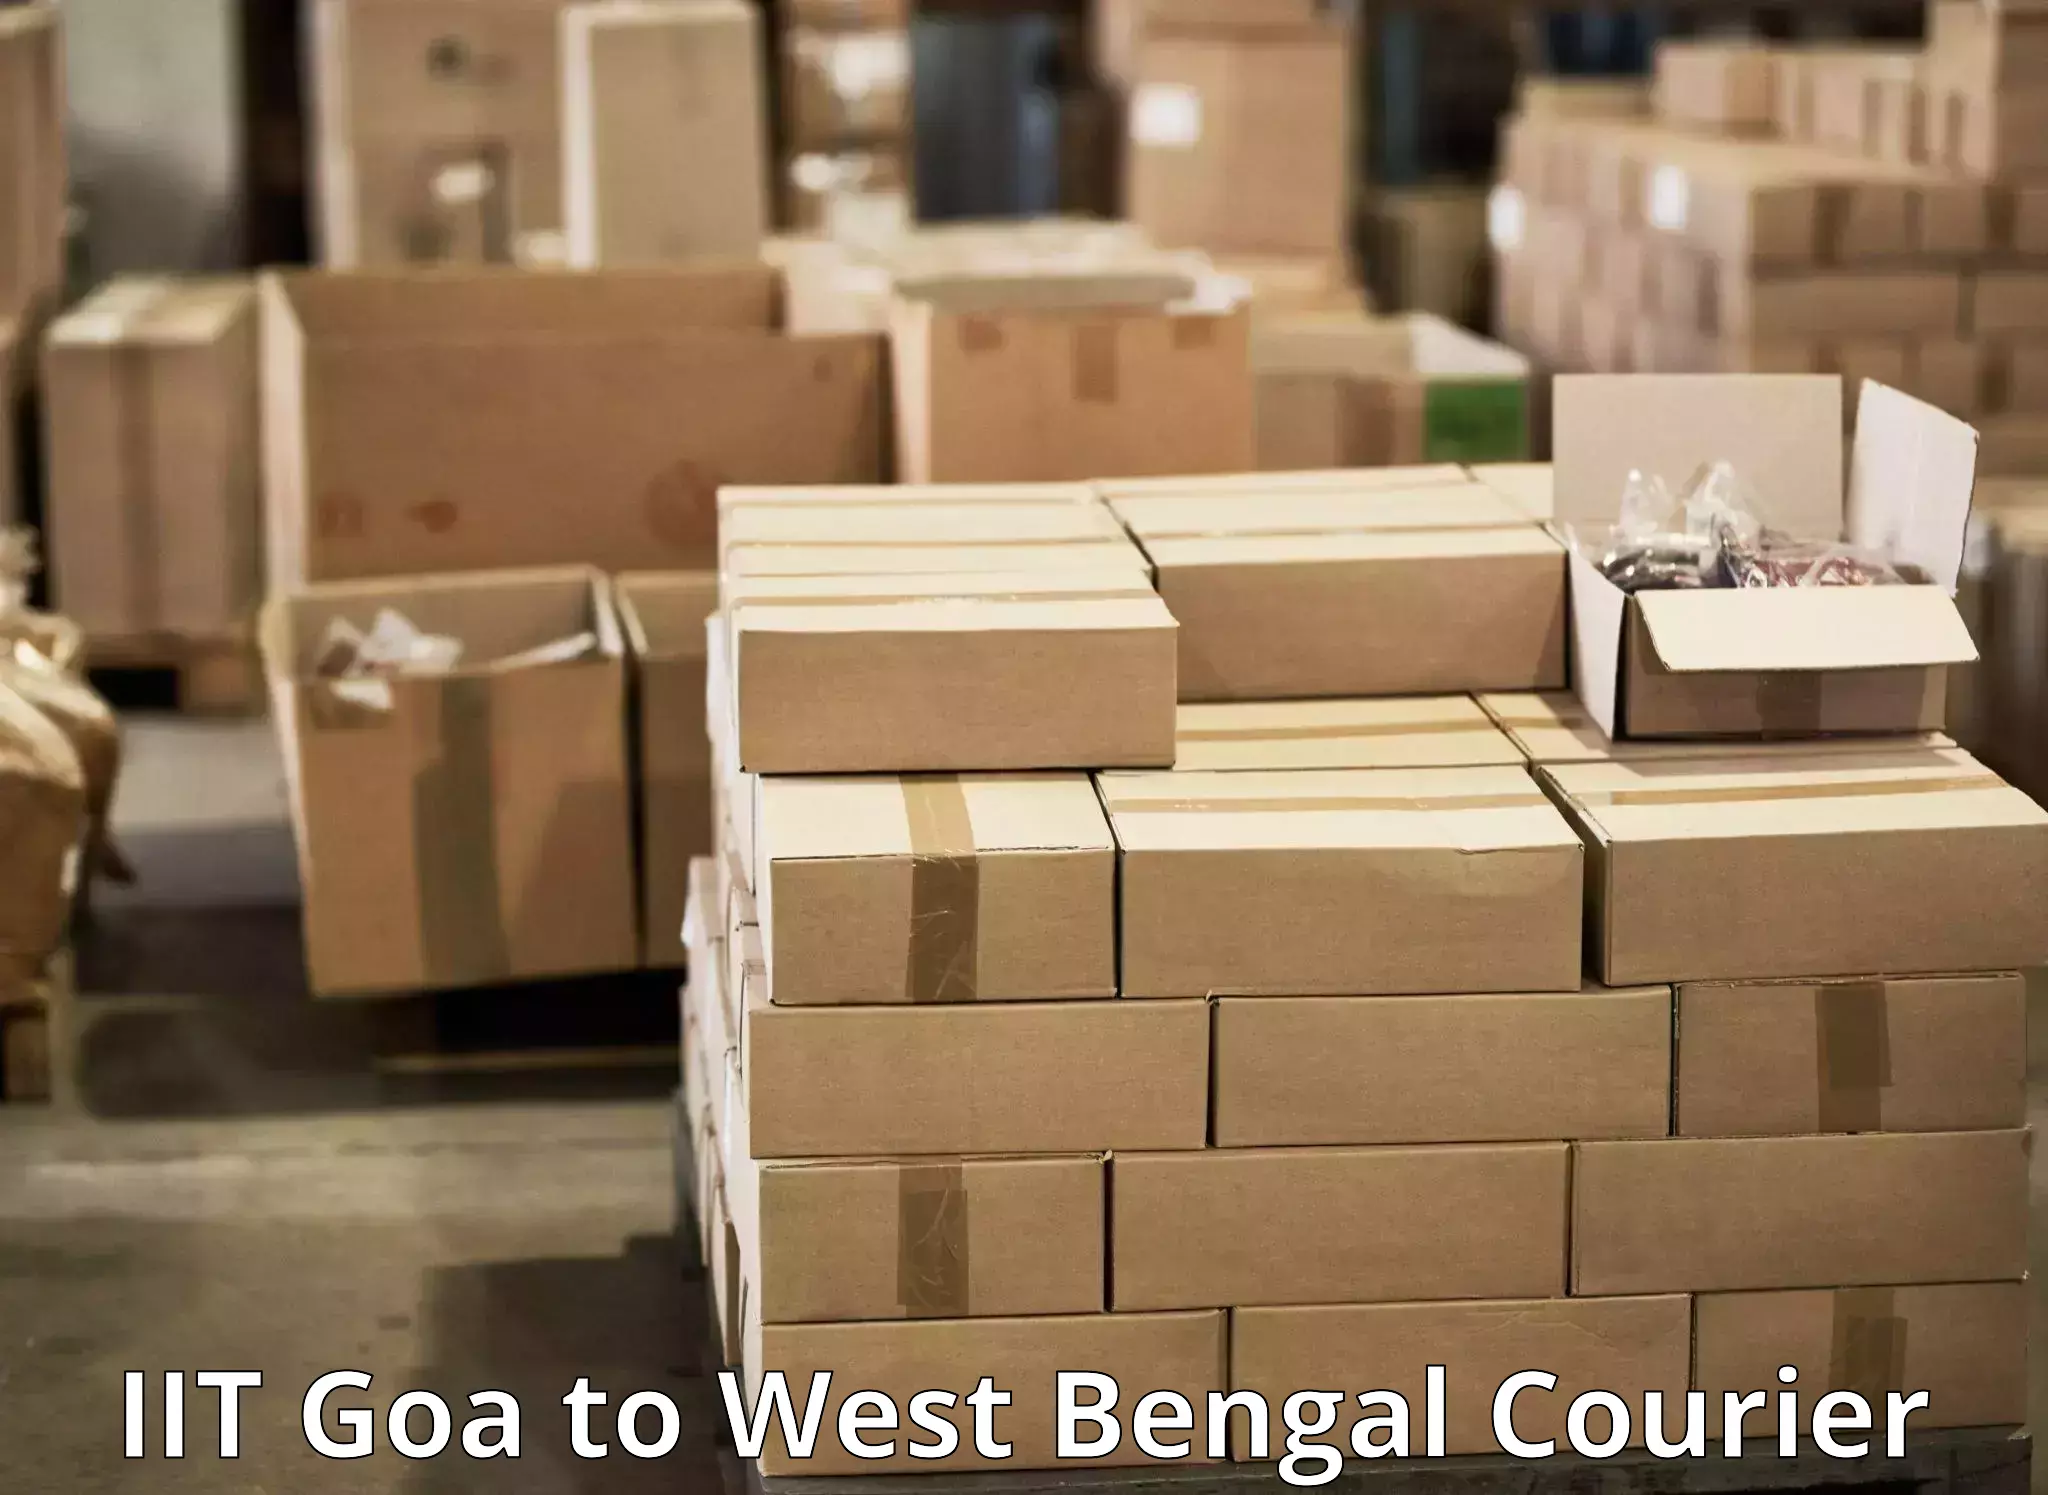 Courier service innovation IIT Goa to Bandel